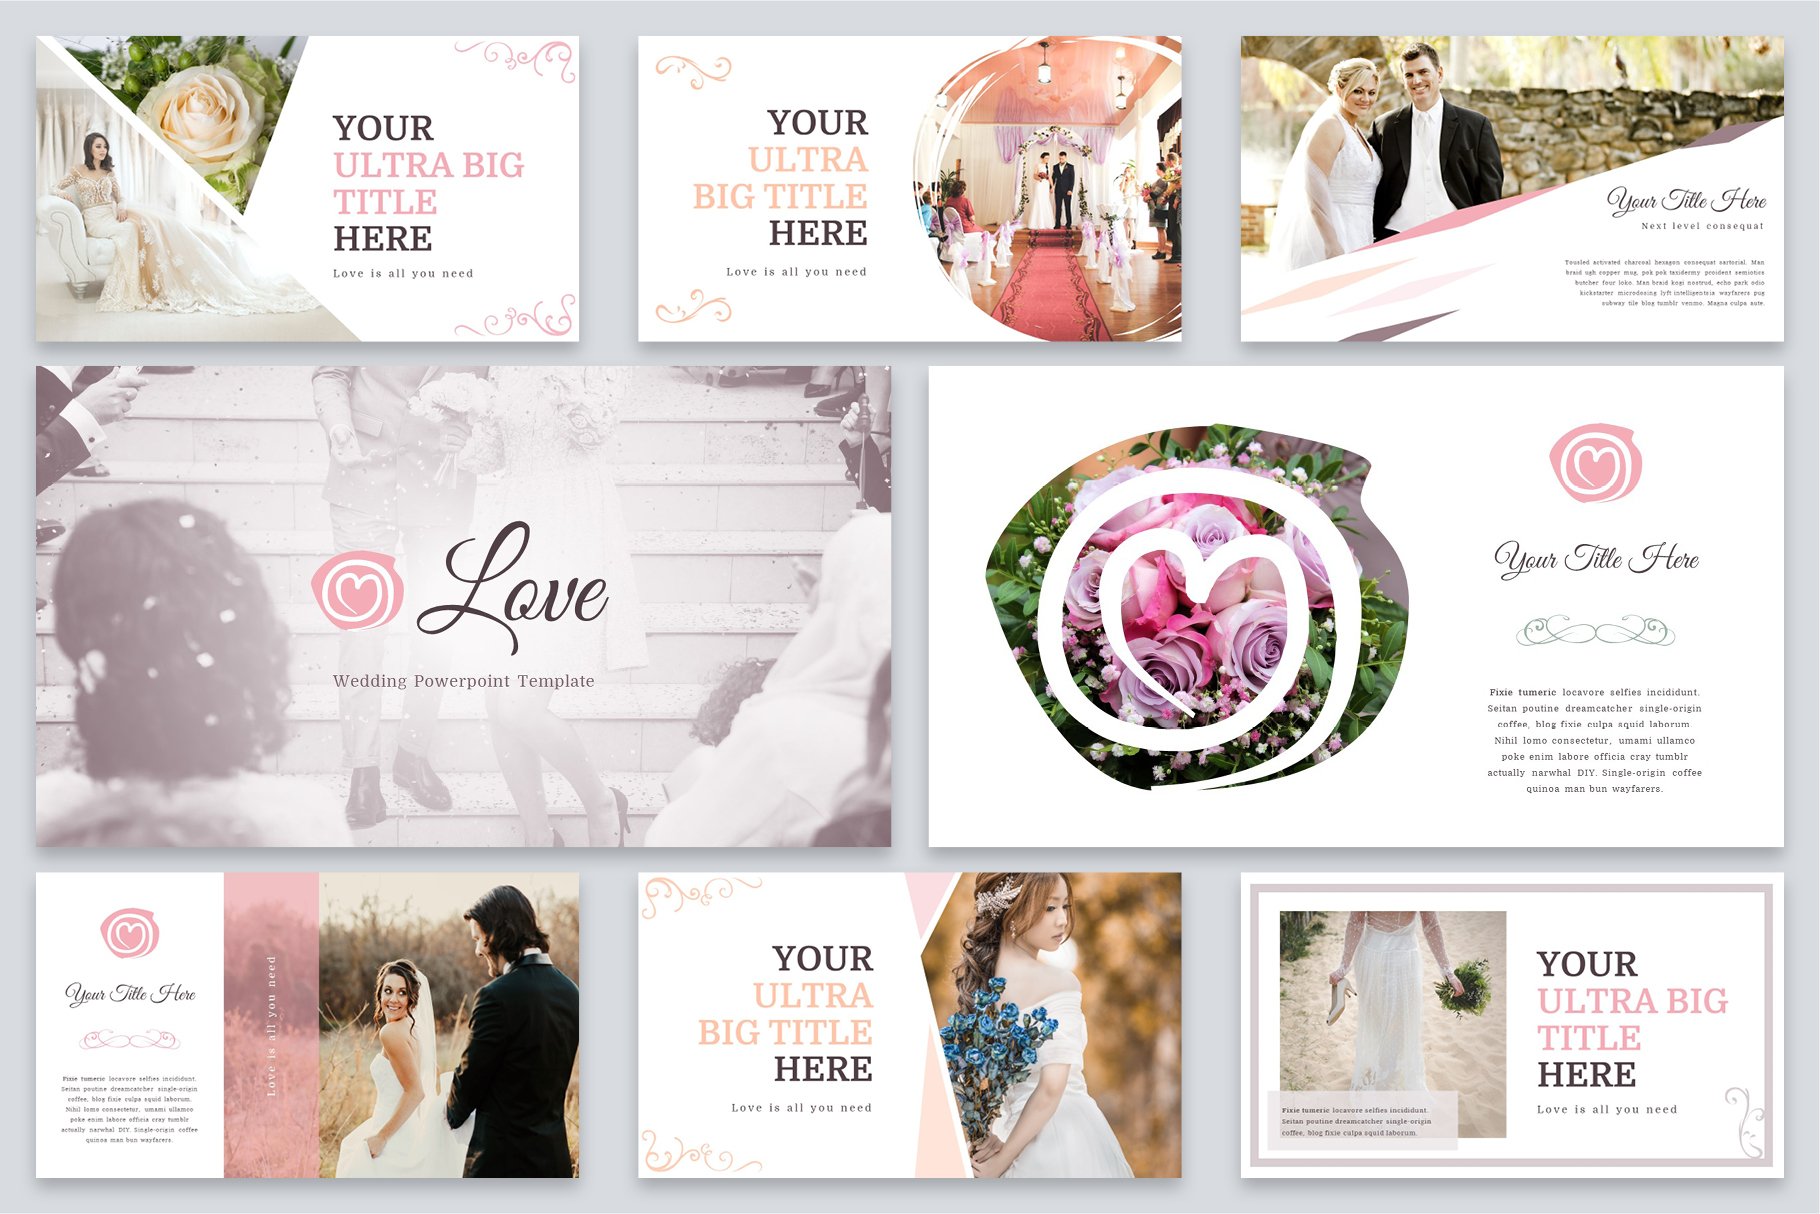 Elegant template for your love story.